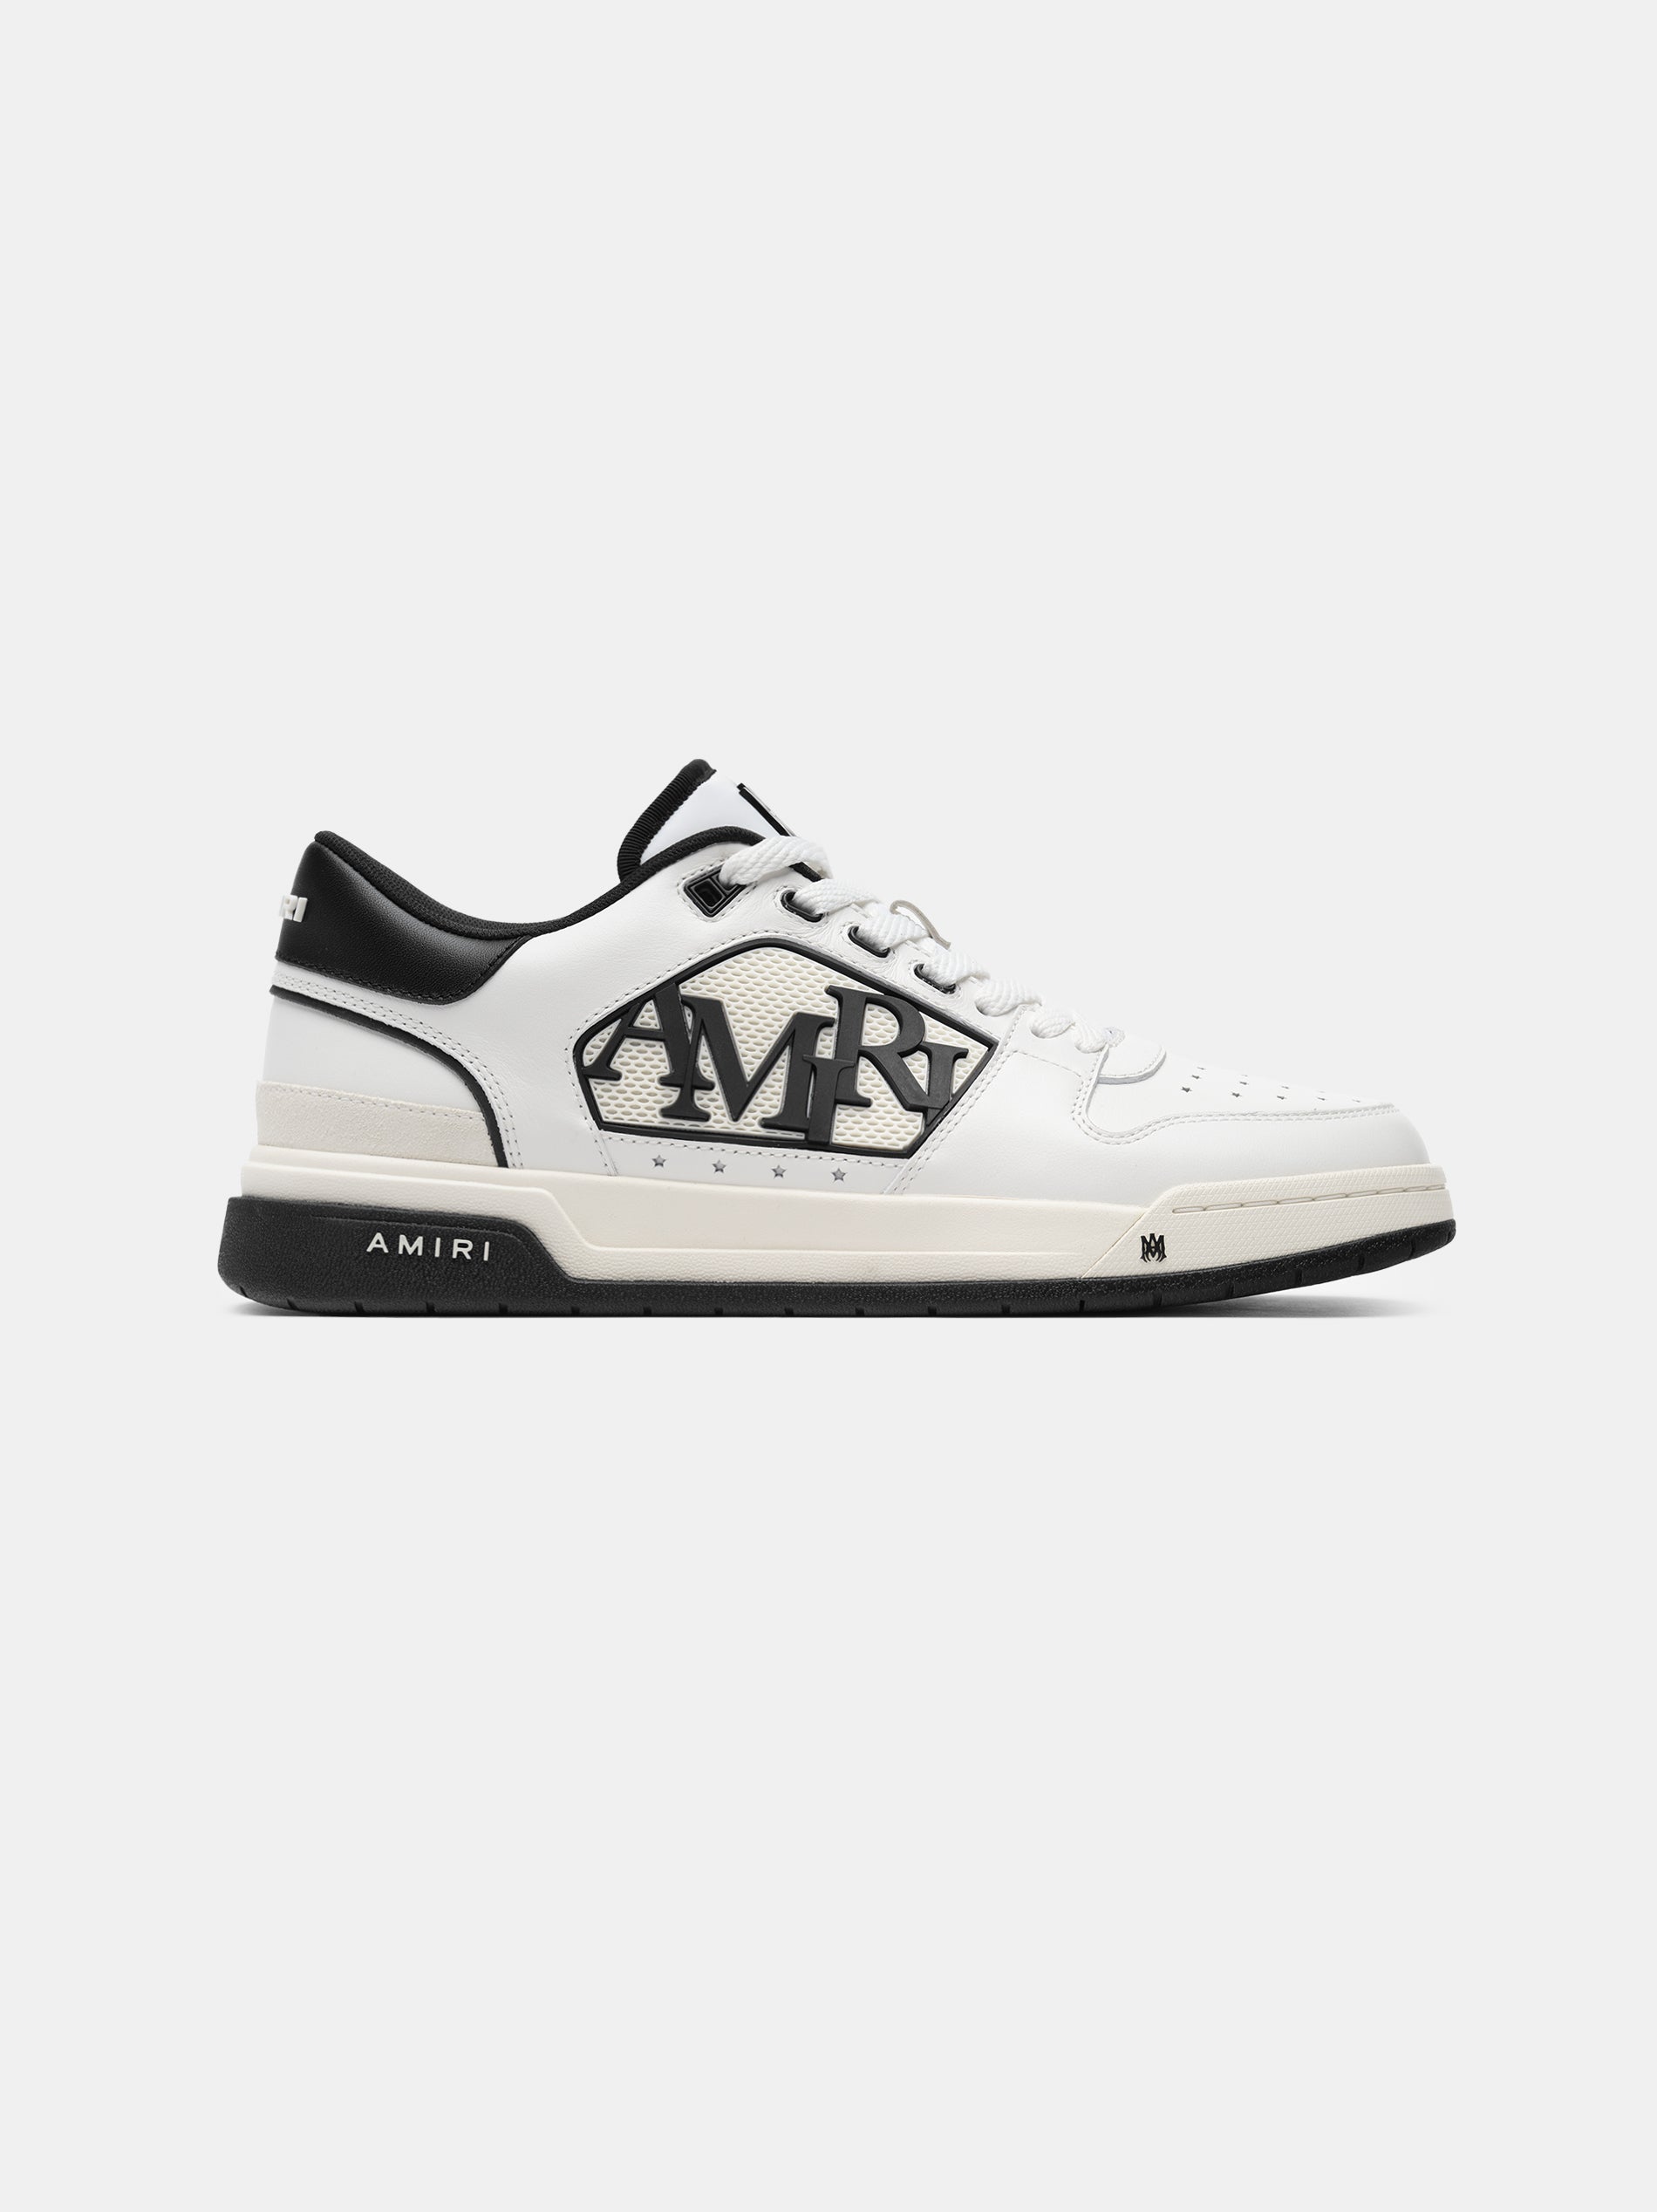 Product WOMEN - WOMEN'S CLASSIC LOW - White Black featured image